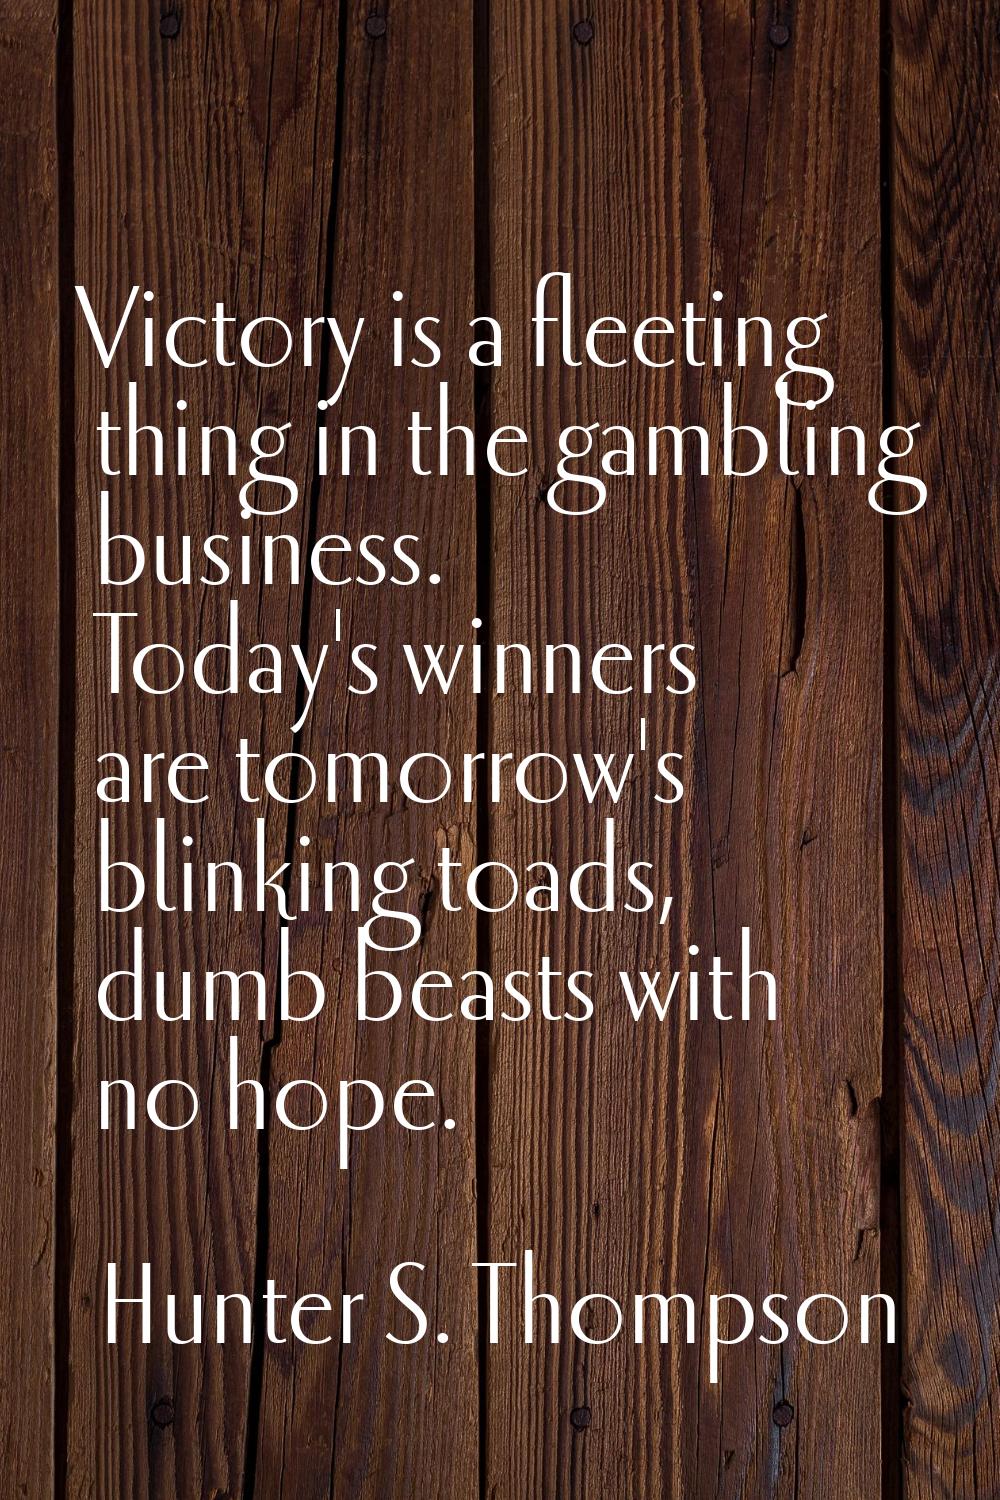 Victory is a fleeting thing in the gambling business. Today's winners are tomorrow's blinking toads